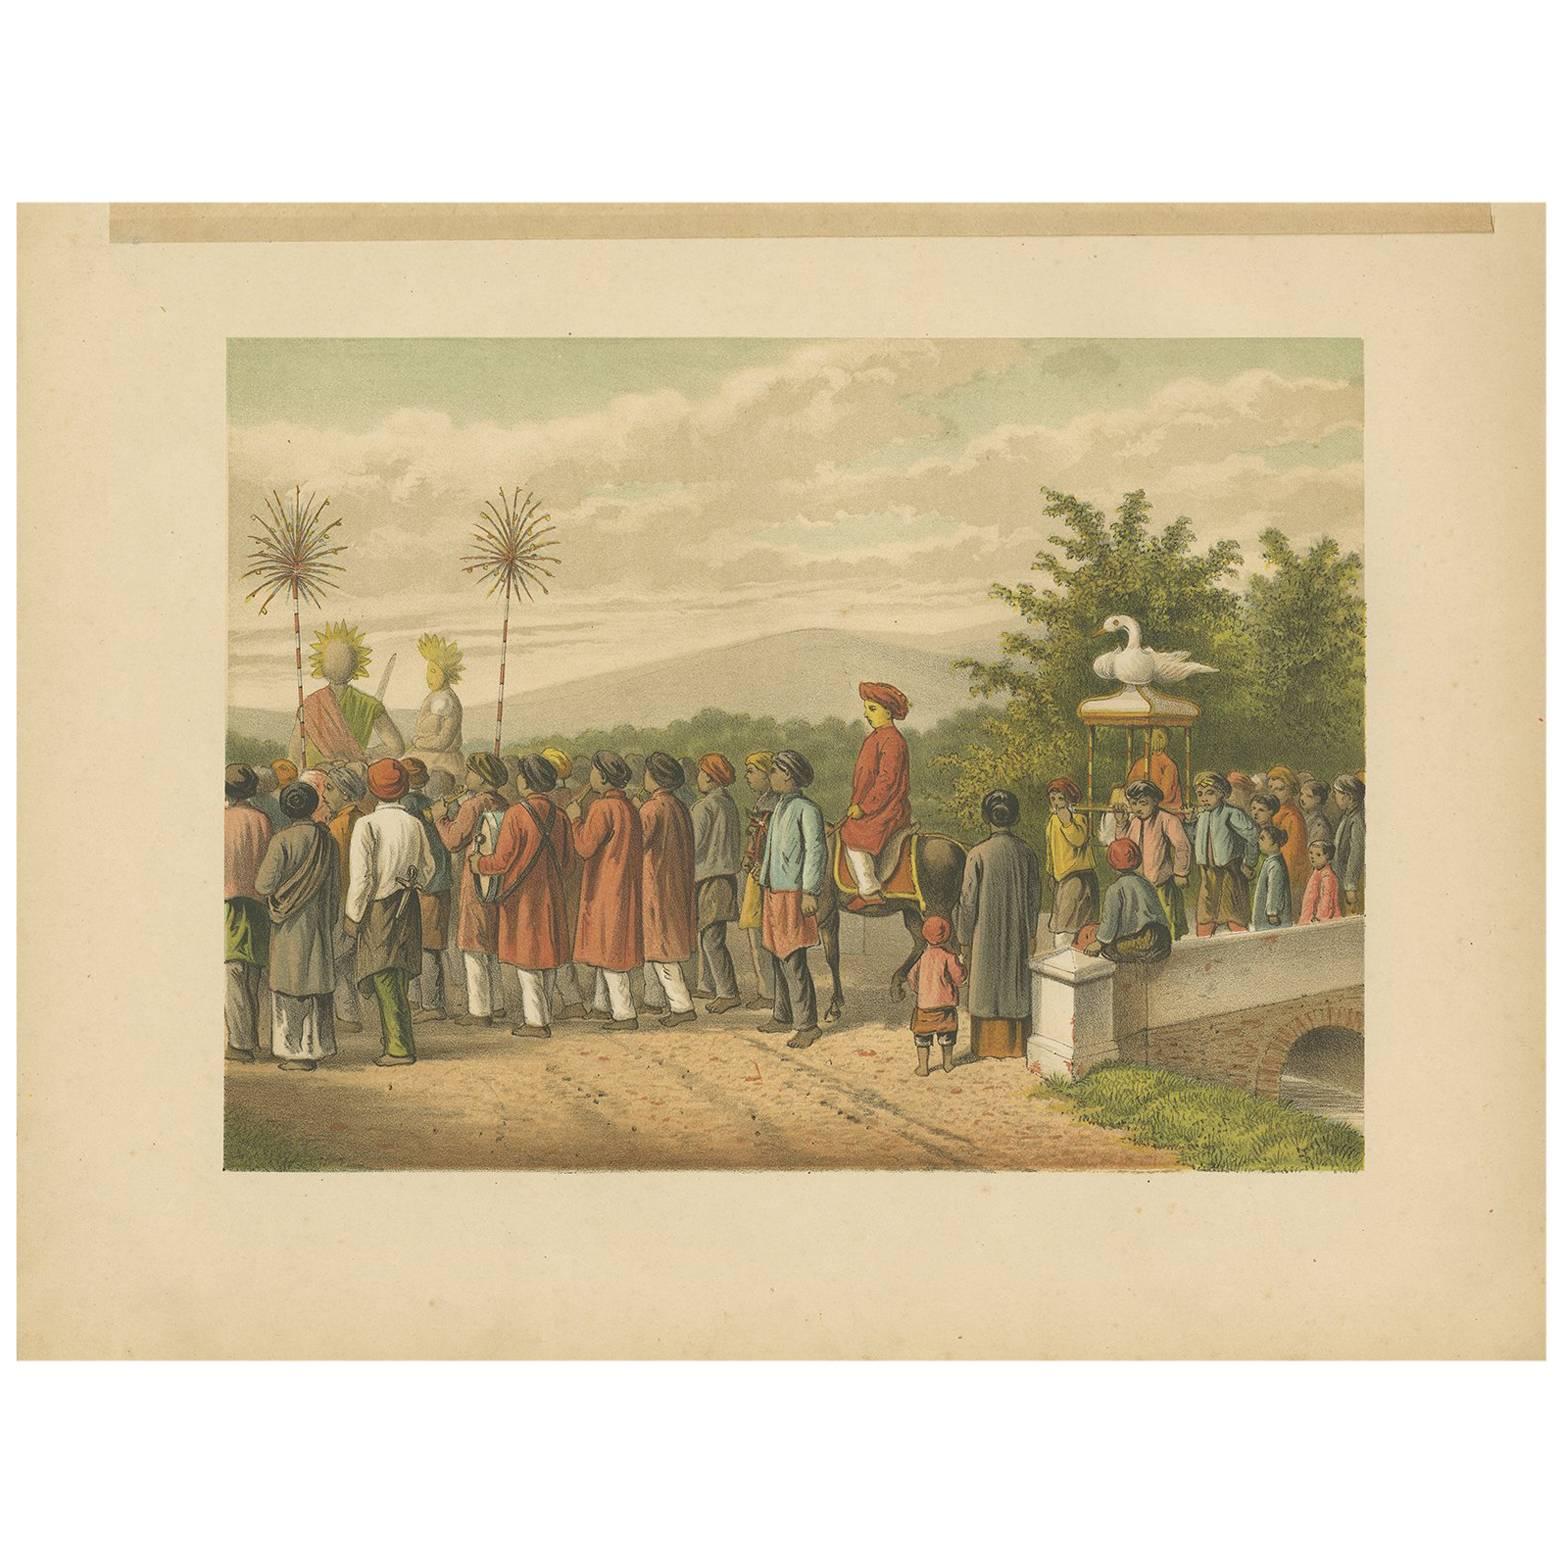 Antique Print of a Javanese Wedding Ceremony by M.T.H. Perelaer, 1888